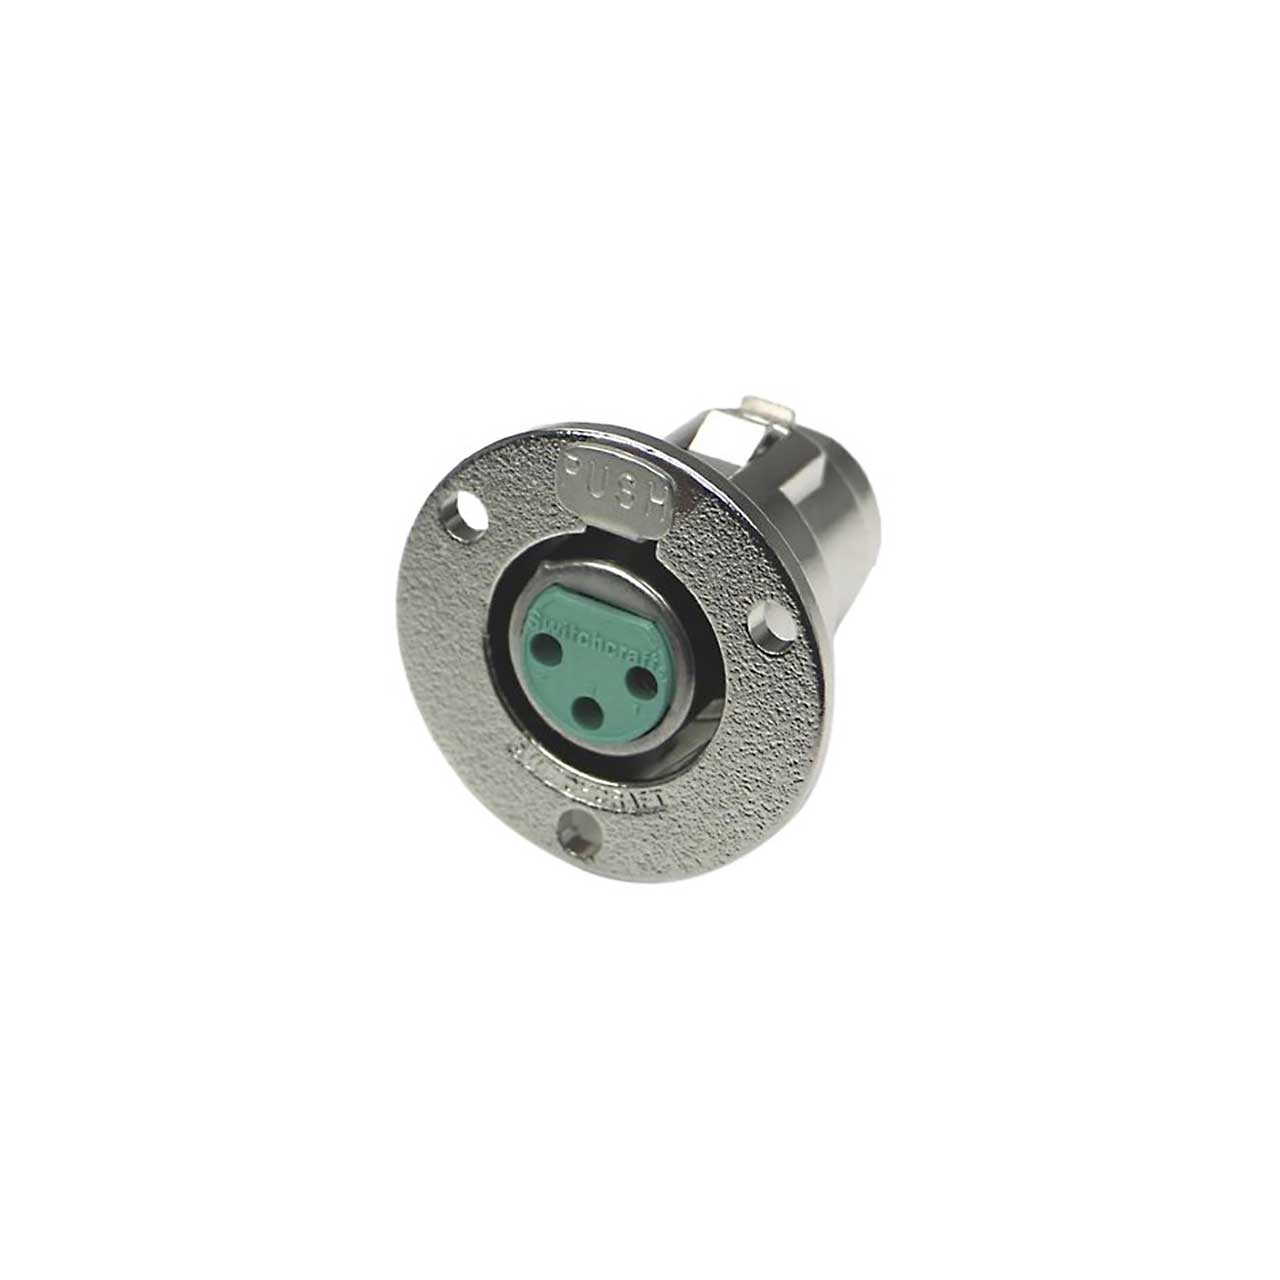 Switchcraft C3f 3 Pin Female Xlr Panelchassis Mount Connector